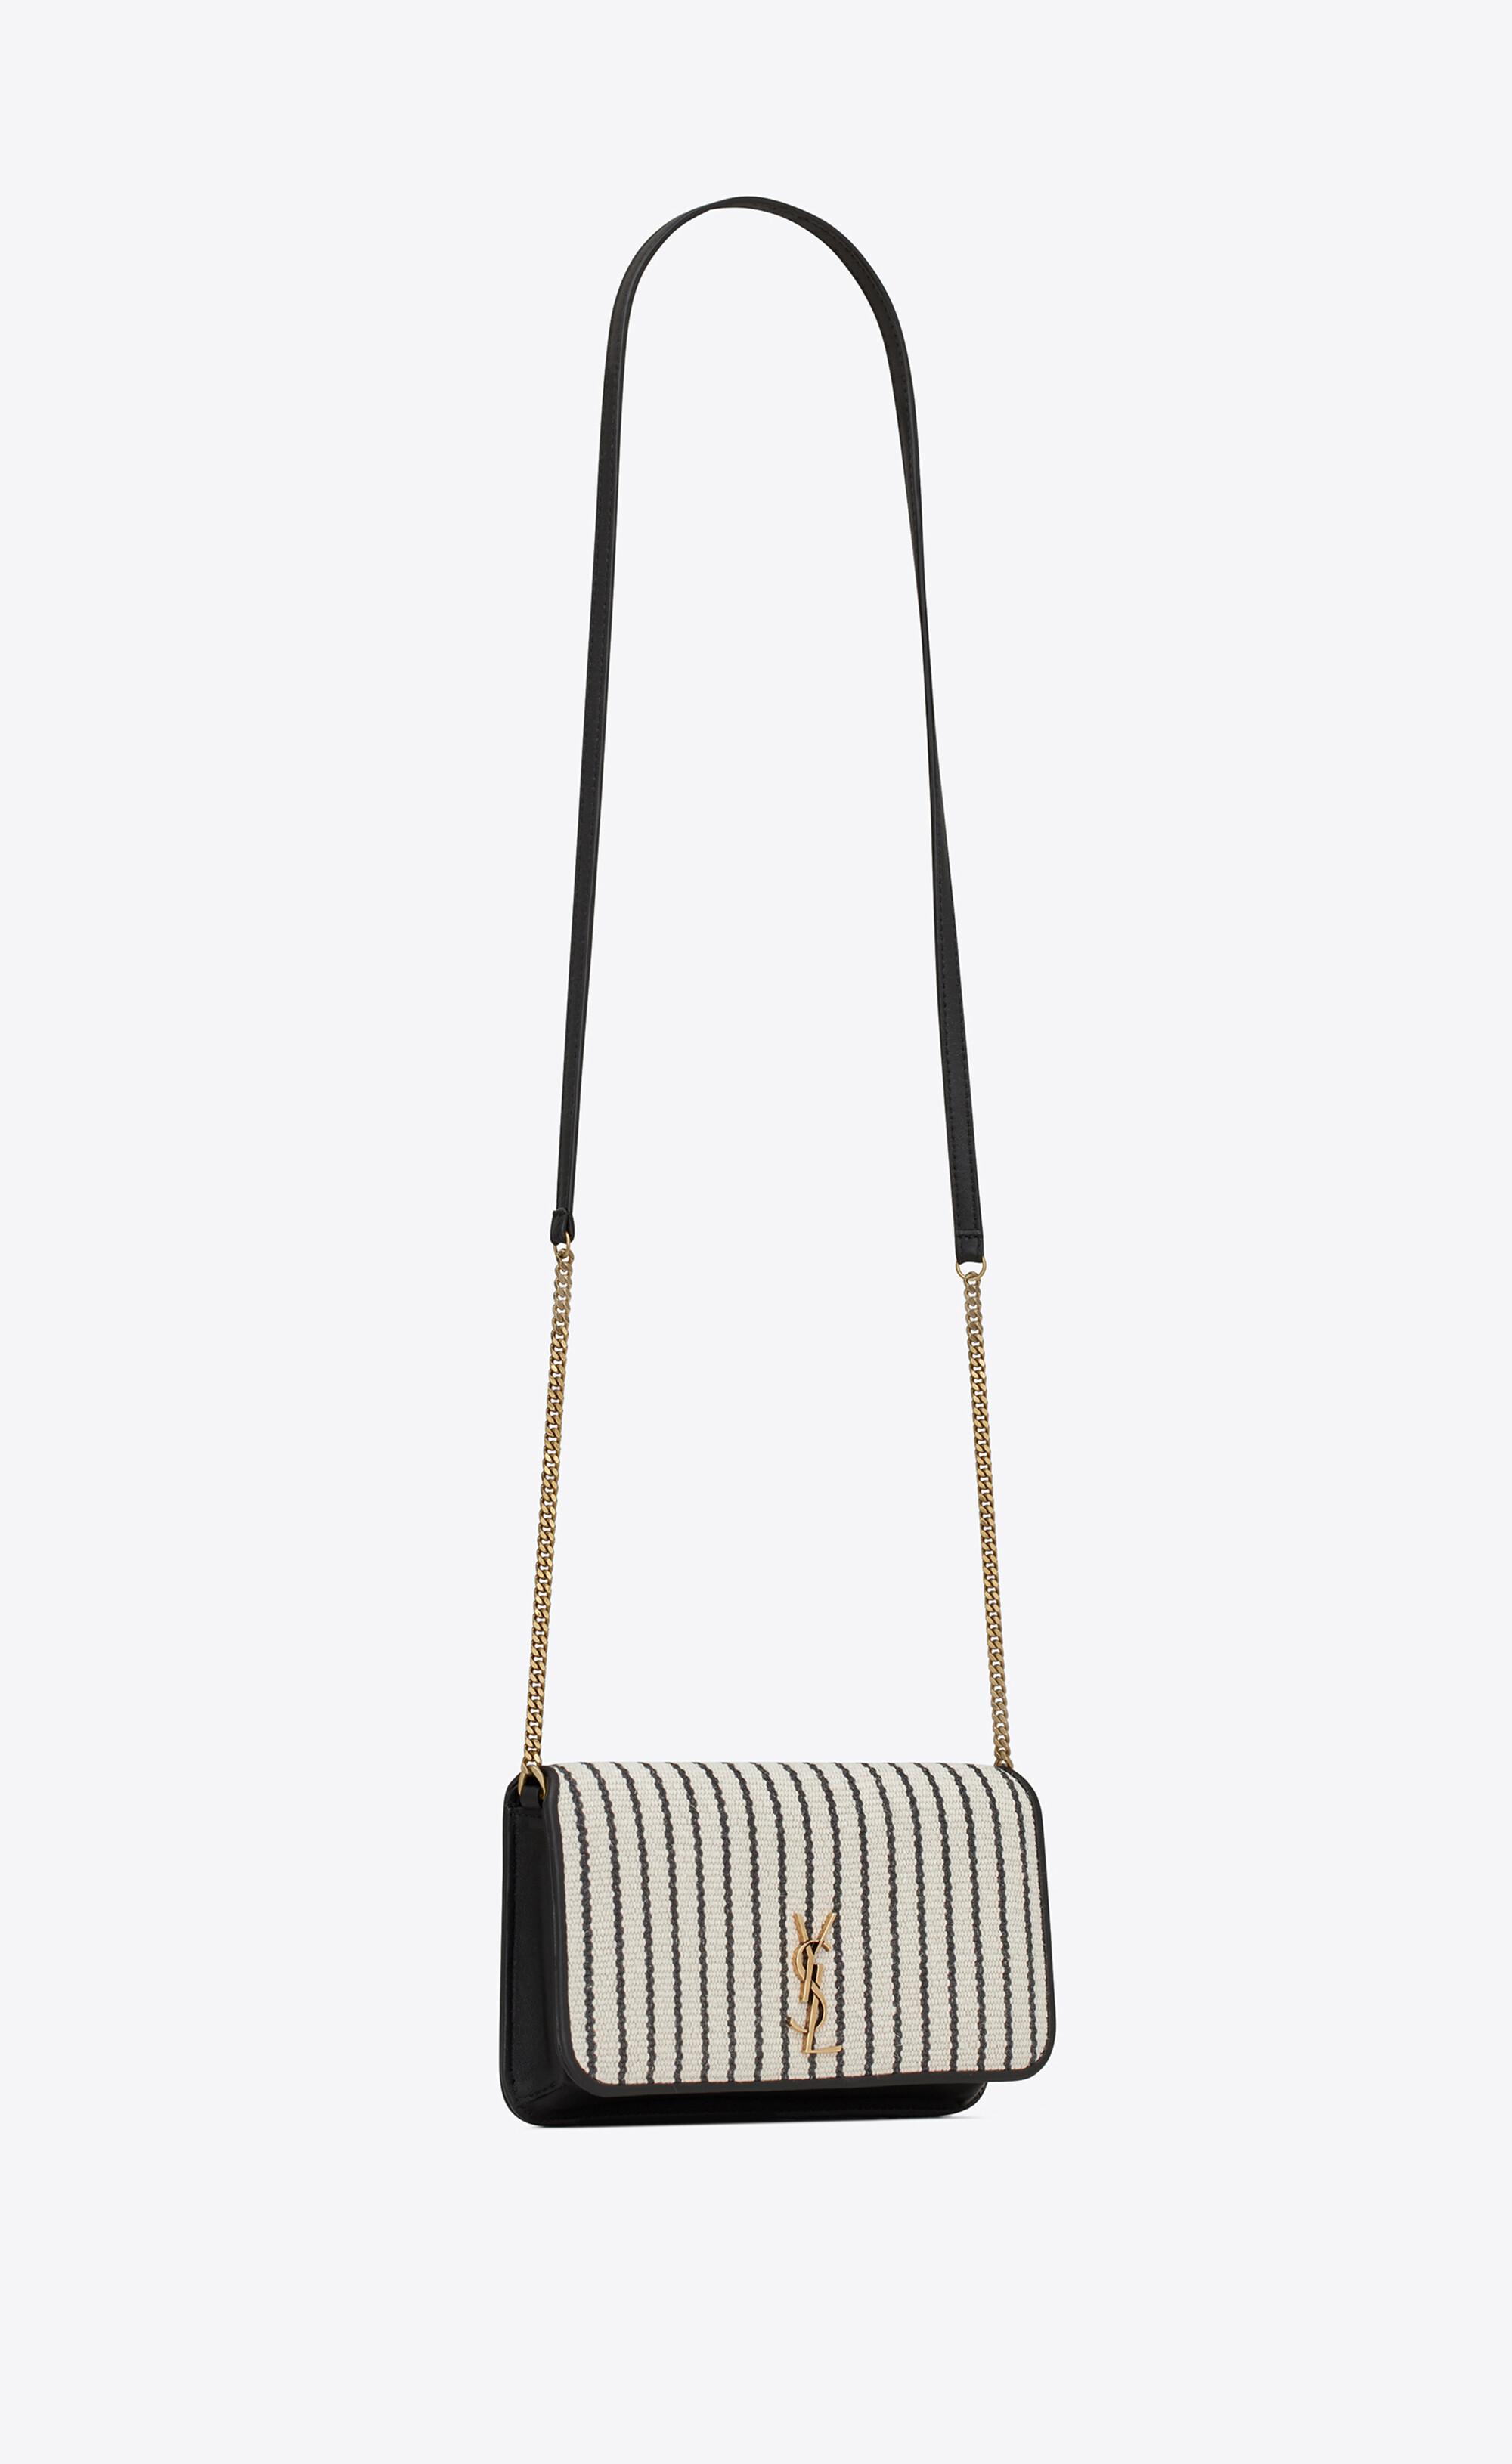 Le MONOGRAMME crossbody pouch in CASSANDRE canvas and smooth leather, Saint Laurent